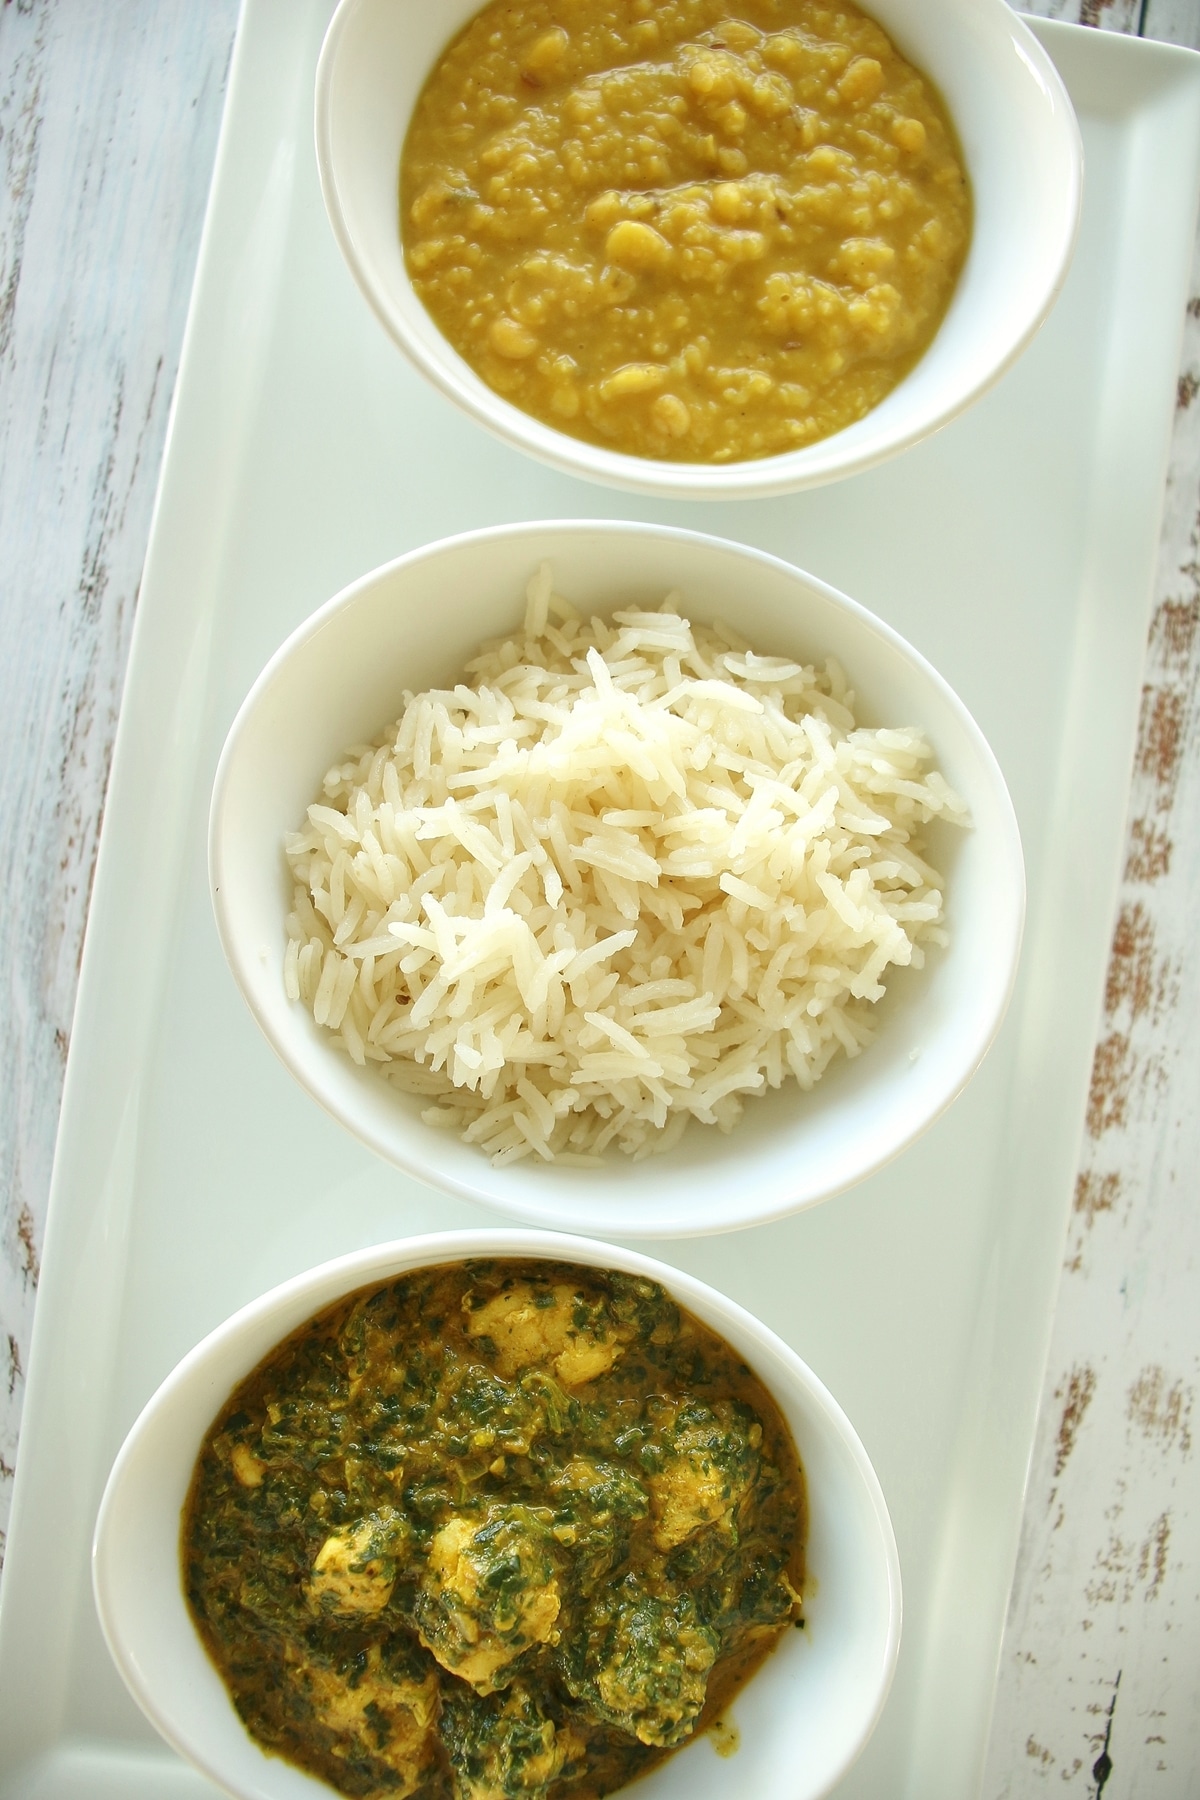 A row of 3 small white bowls filled with yellow and green curries and rice.